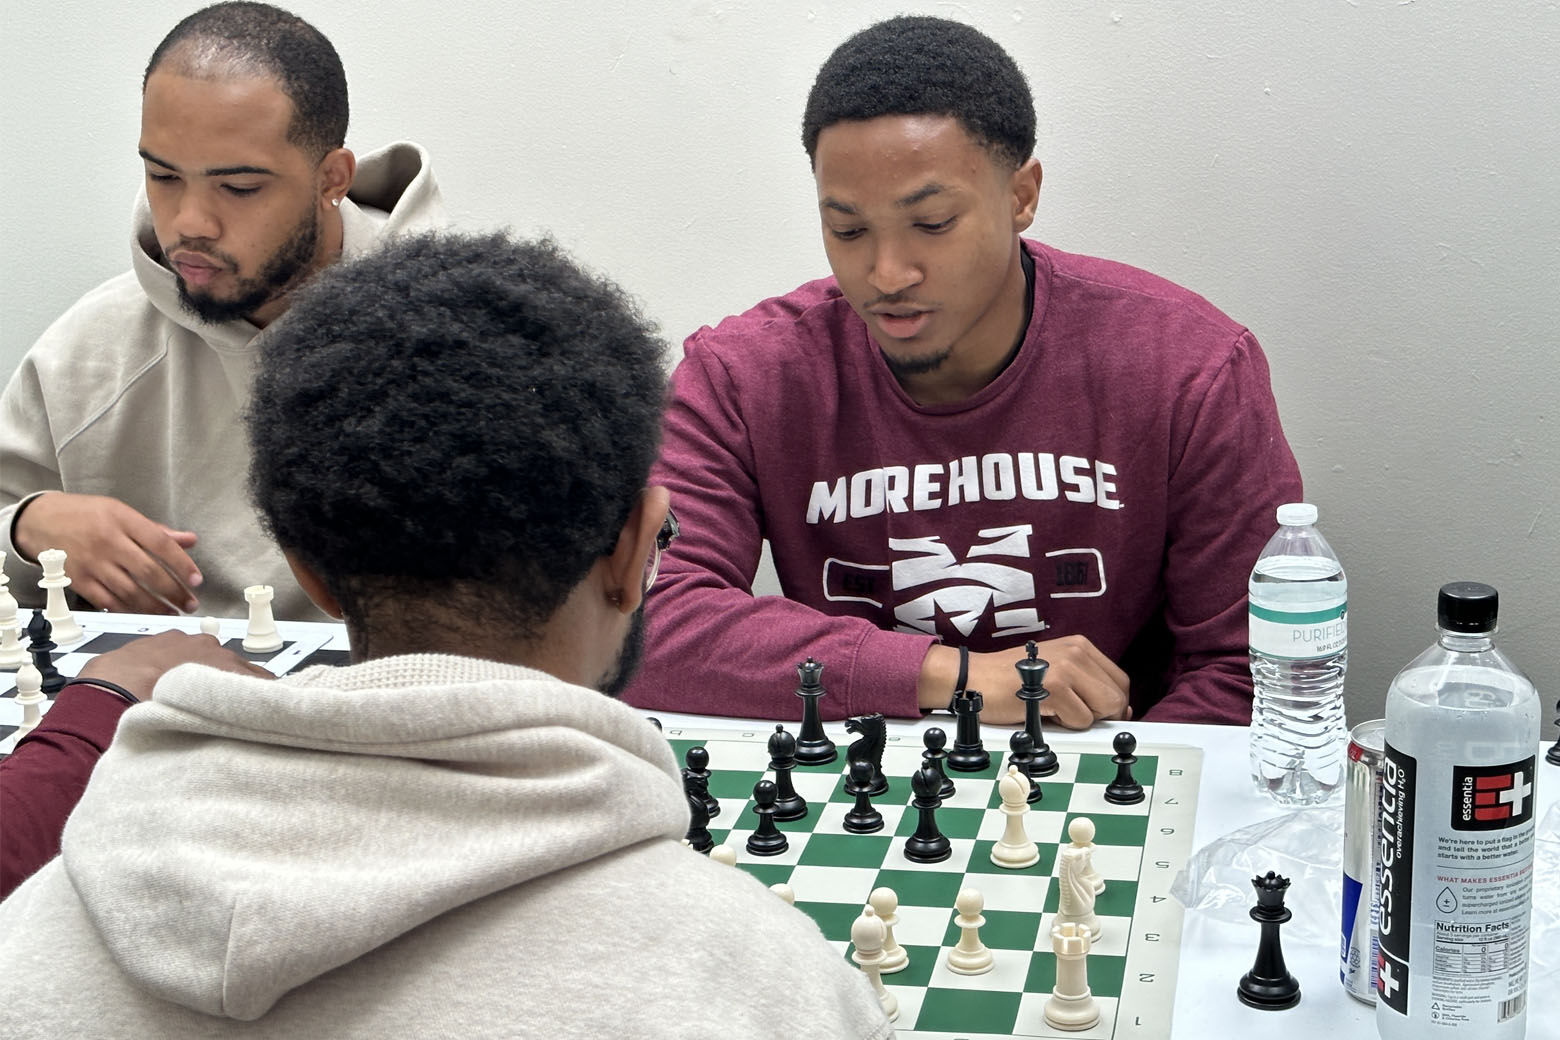 Maurice Ashley's Chess For Progress: How The Grandmaster Is Using